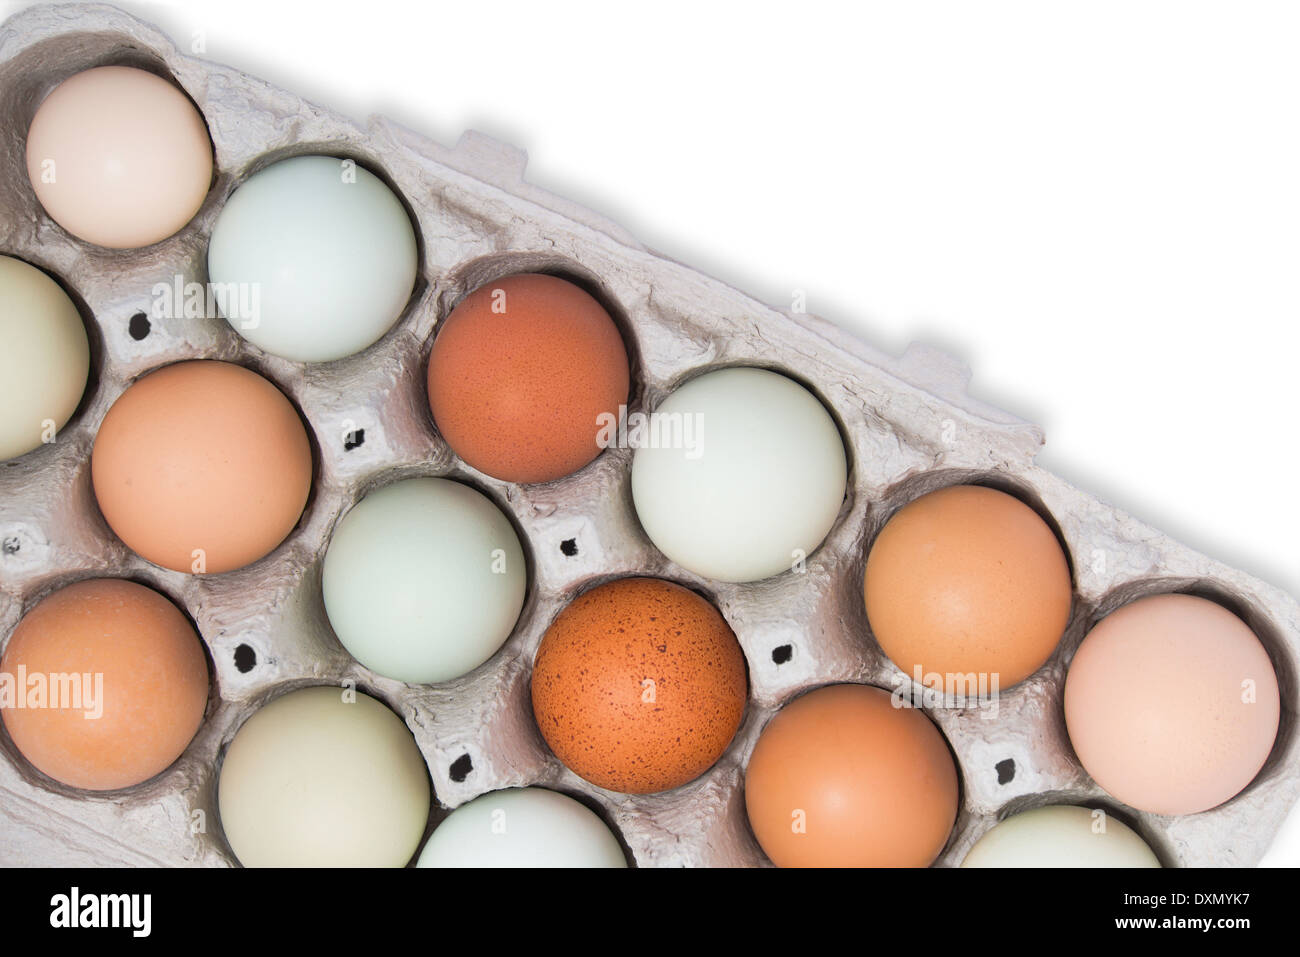 Assortment of different color, fresh, chicken eggs in a gray tray, isolated on white Stock Photo